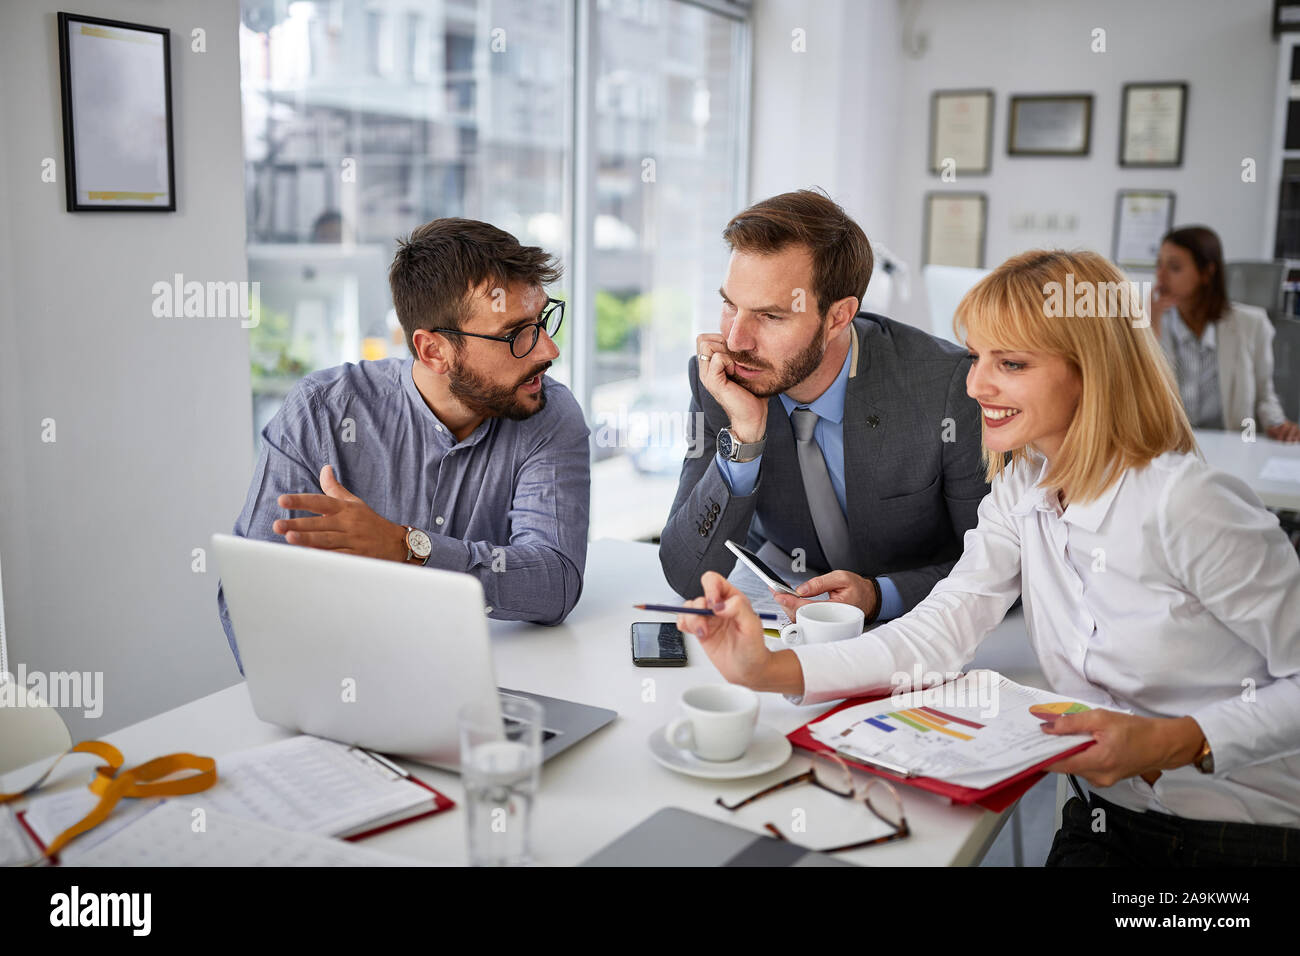 Successful business people have meeting at work Stock Photo